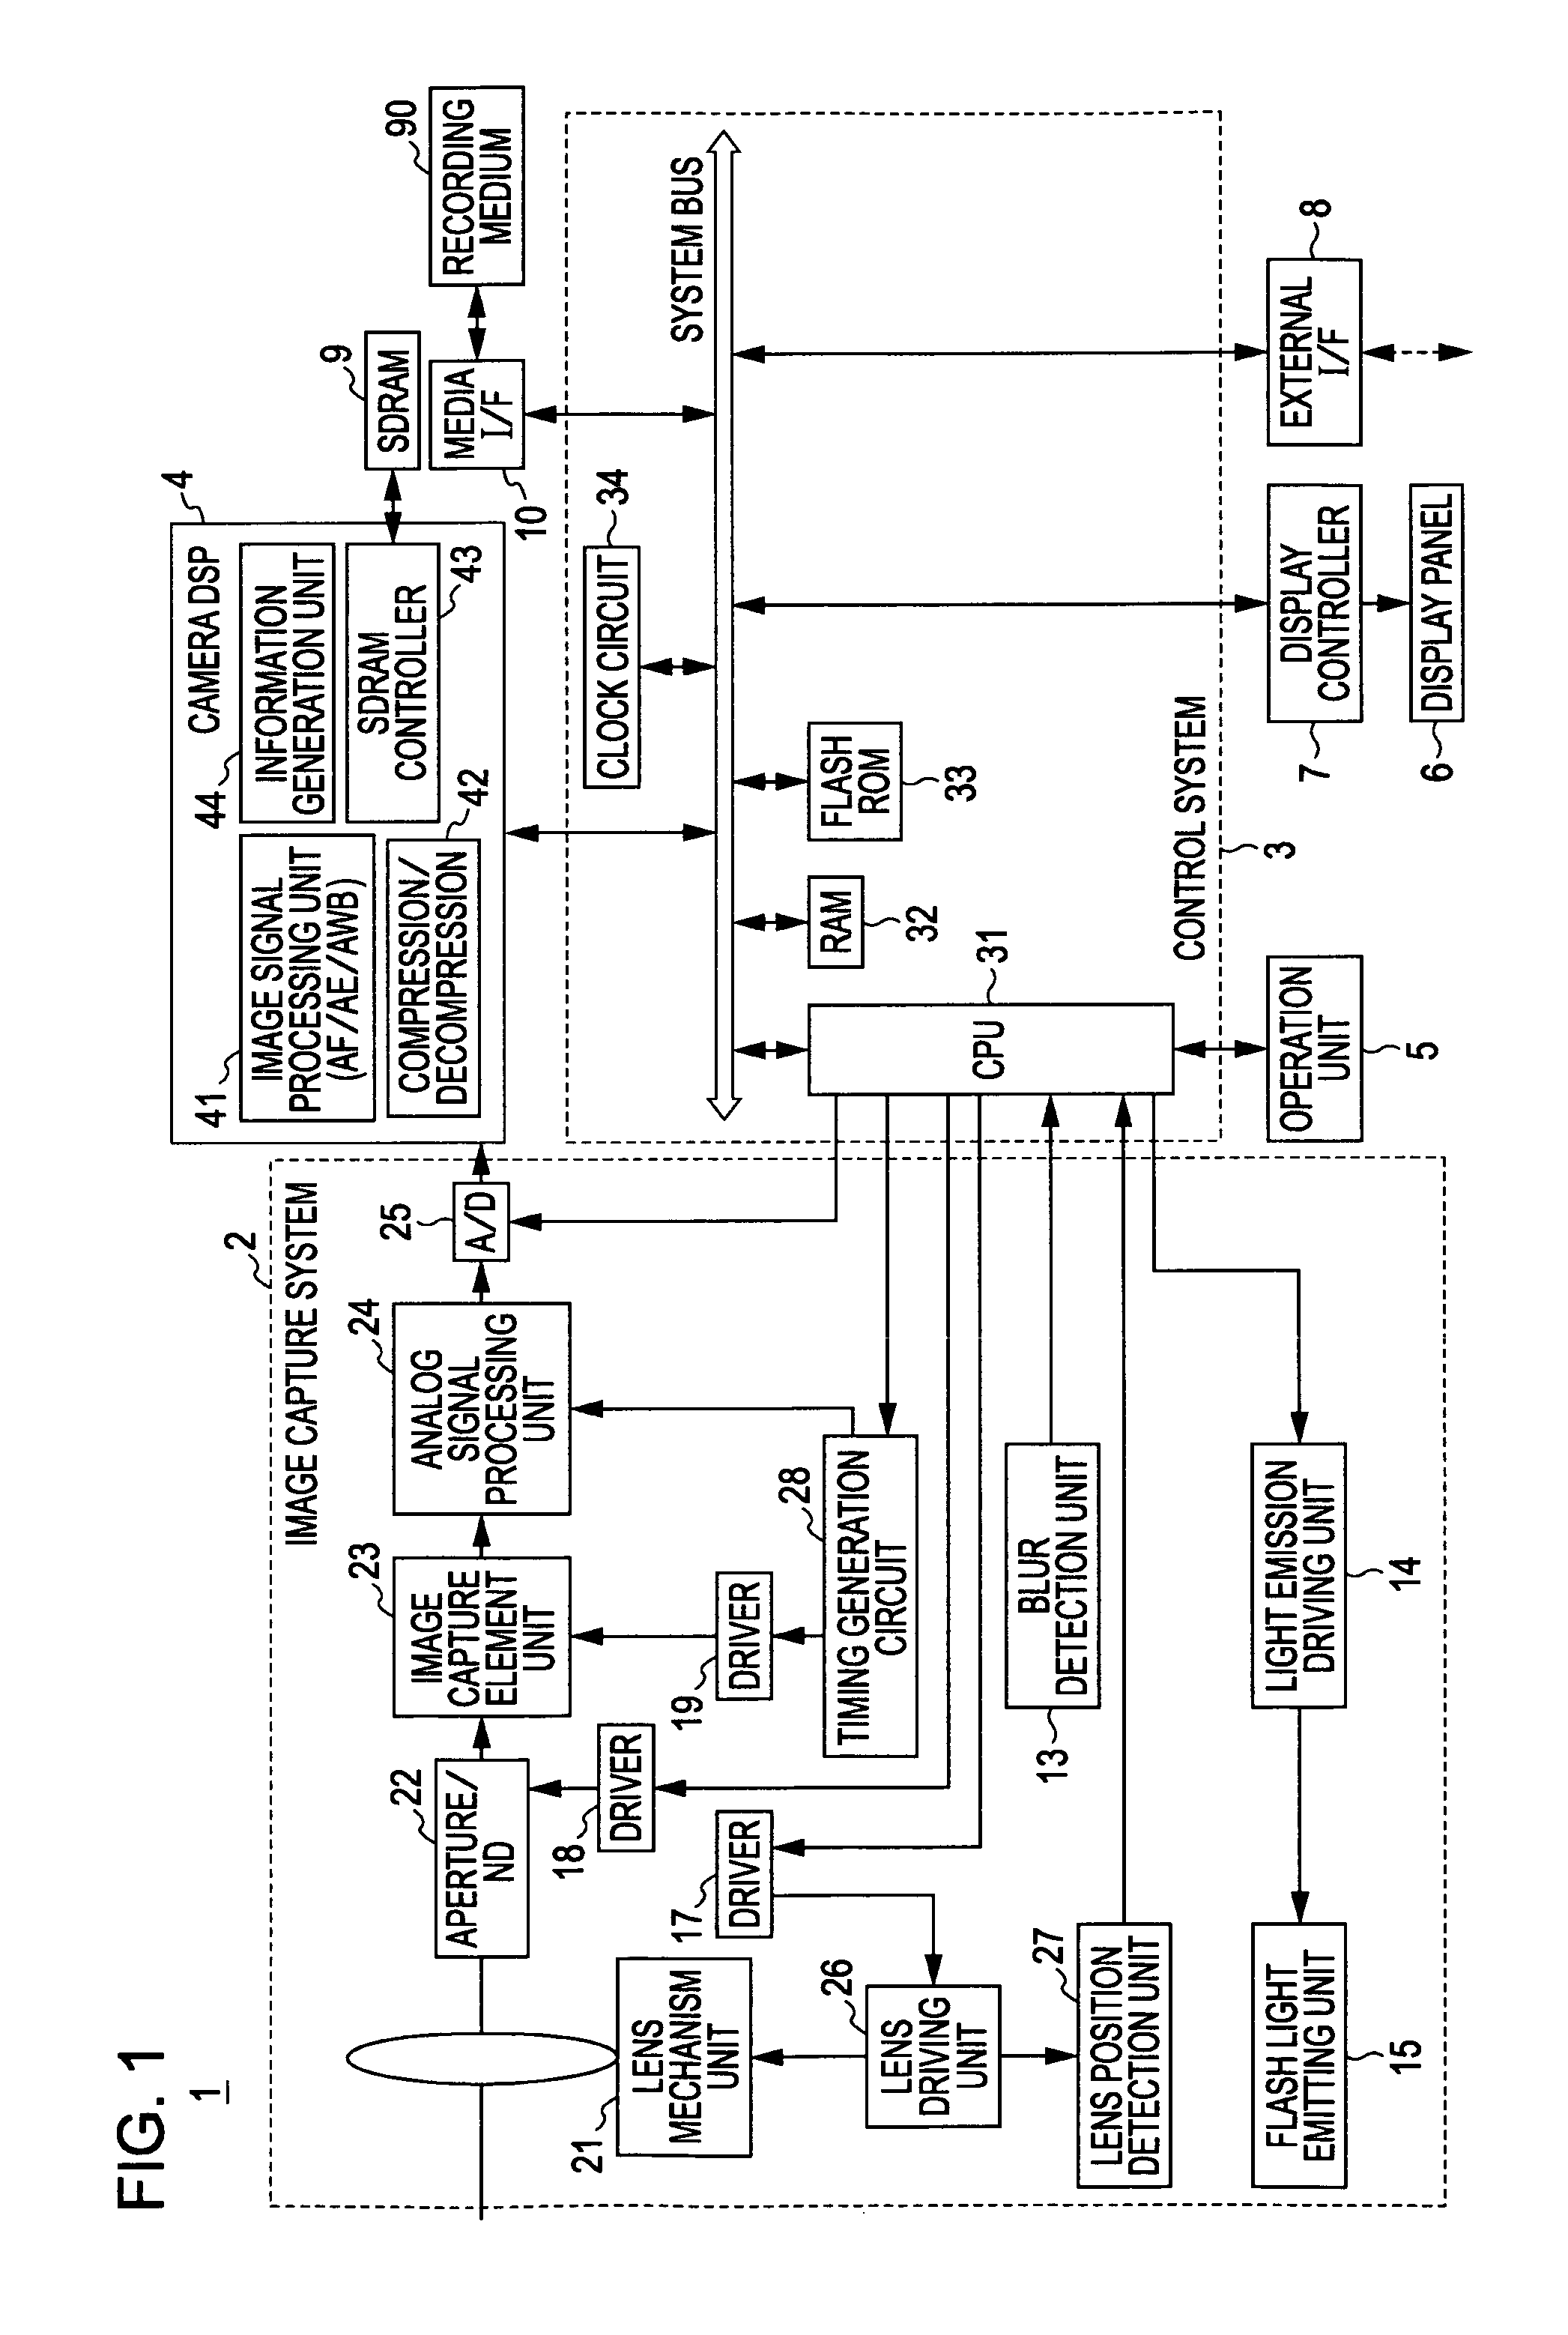 Image processing apparatus, and method, for providing special effect